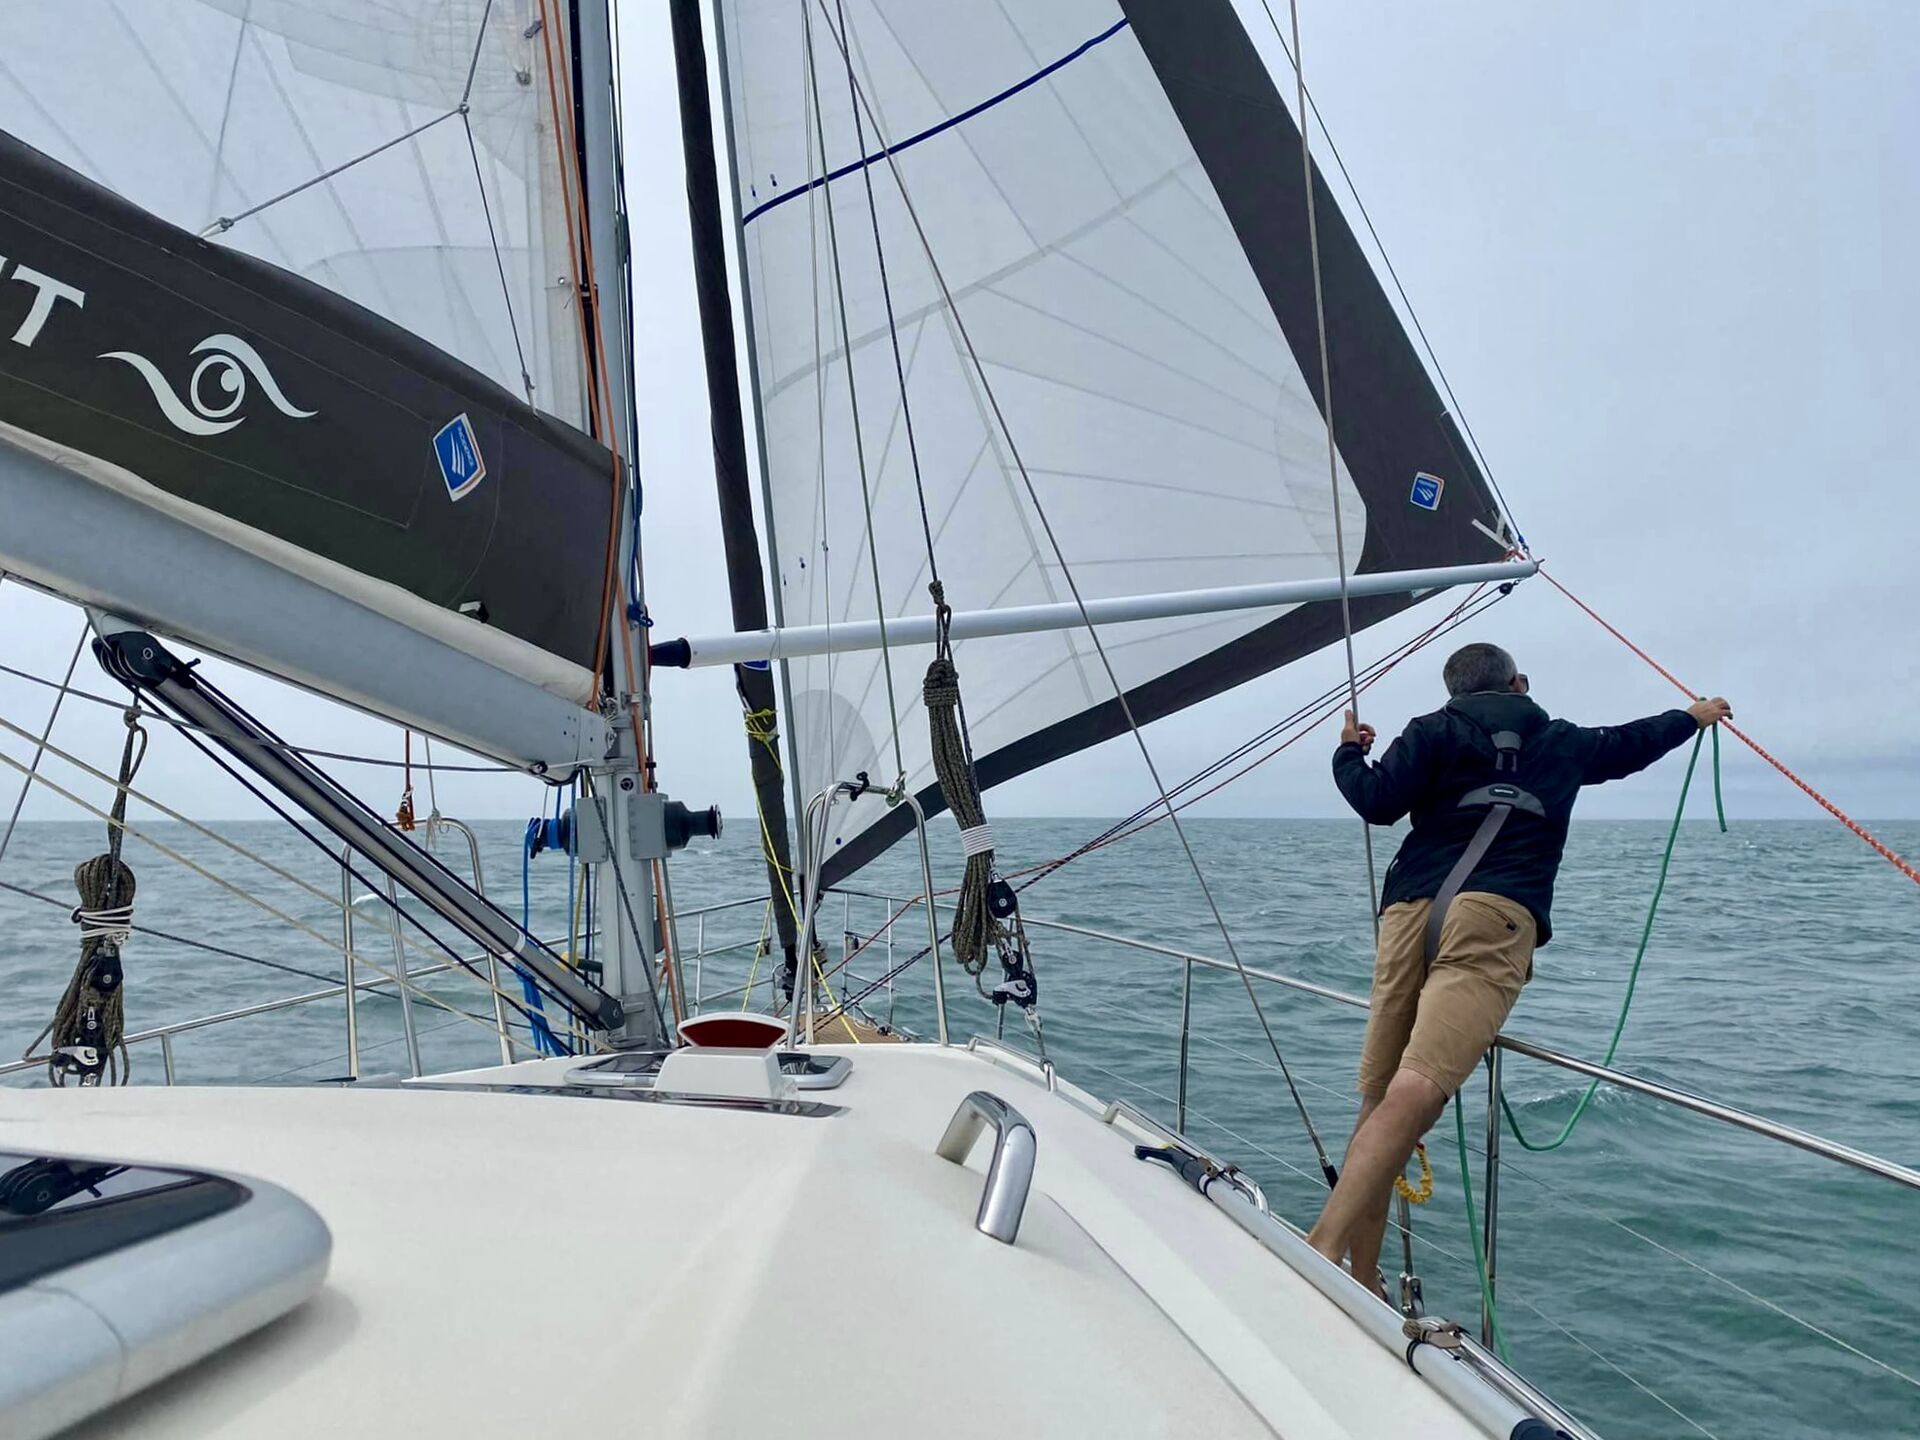 Poling out the solent sail as we raced across Muscongus Bay.